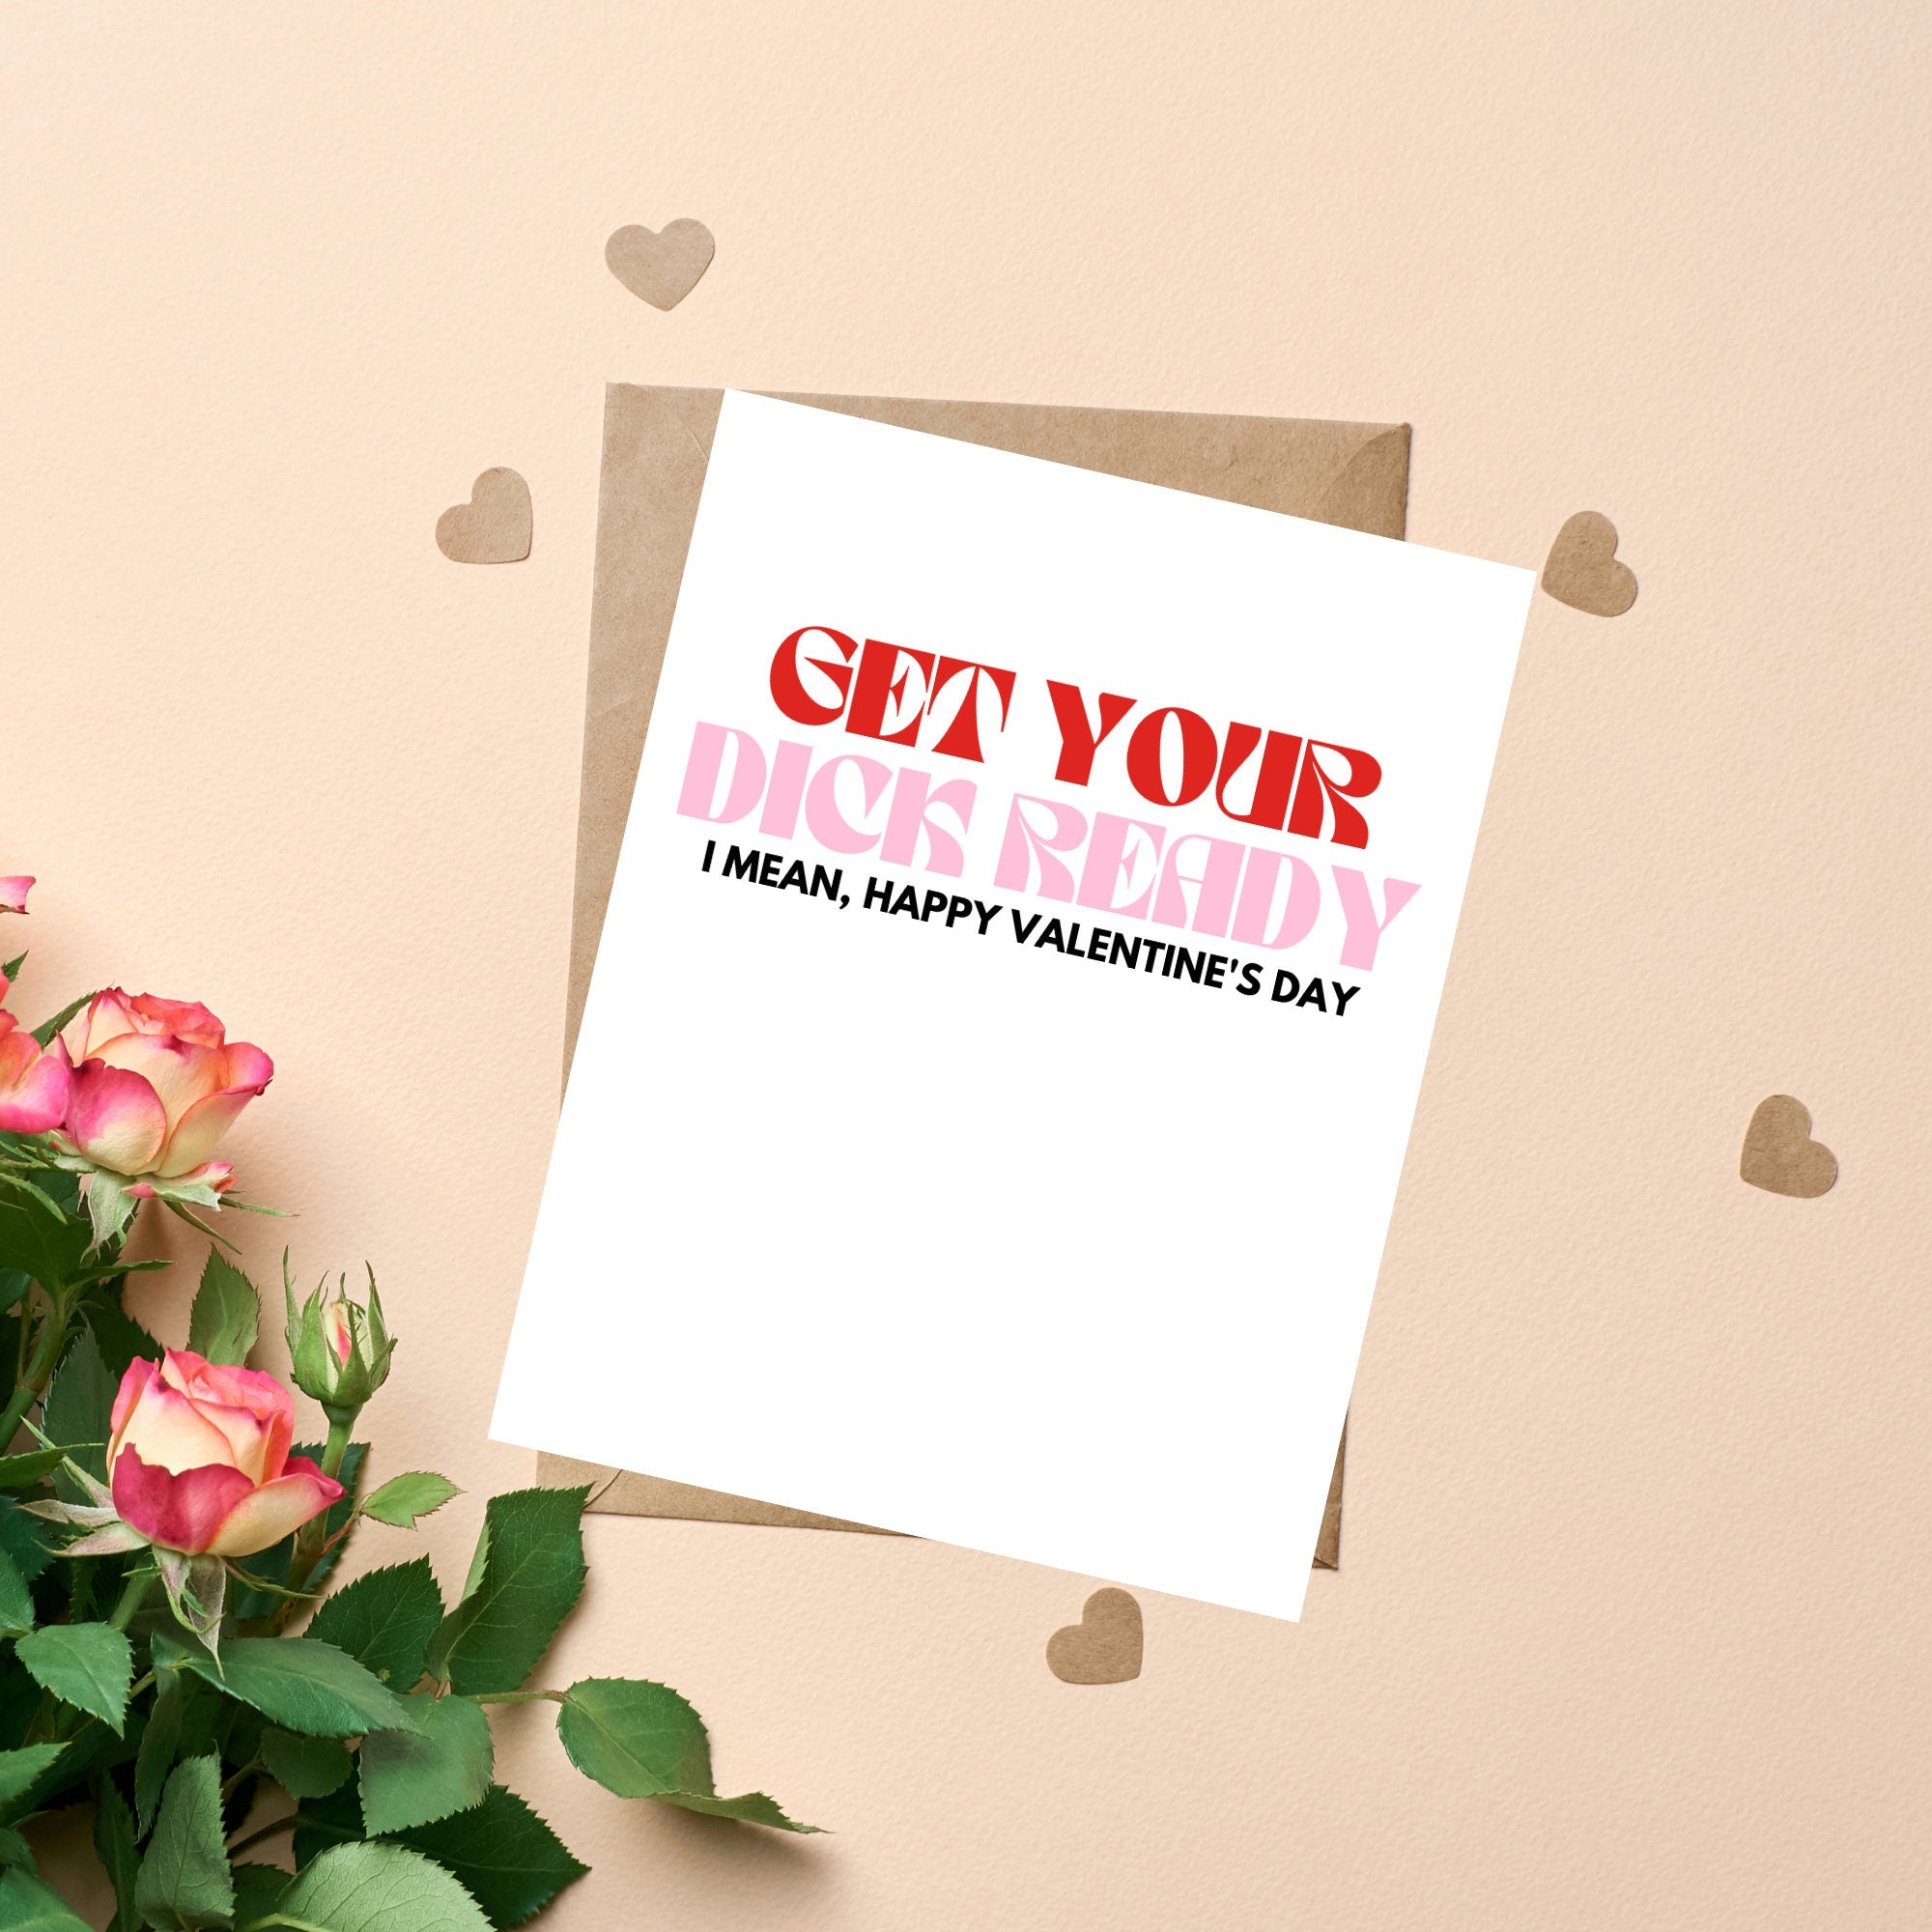 Get Your Dick Ready Valentine's Day Card